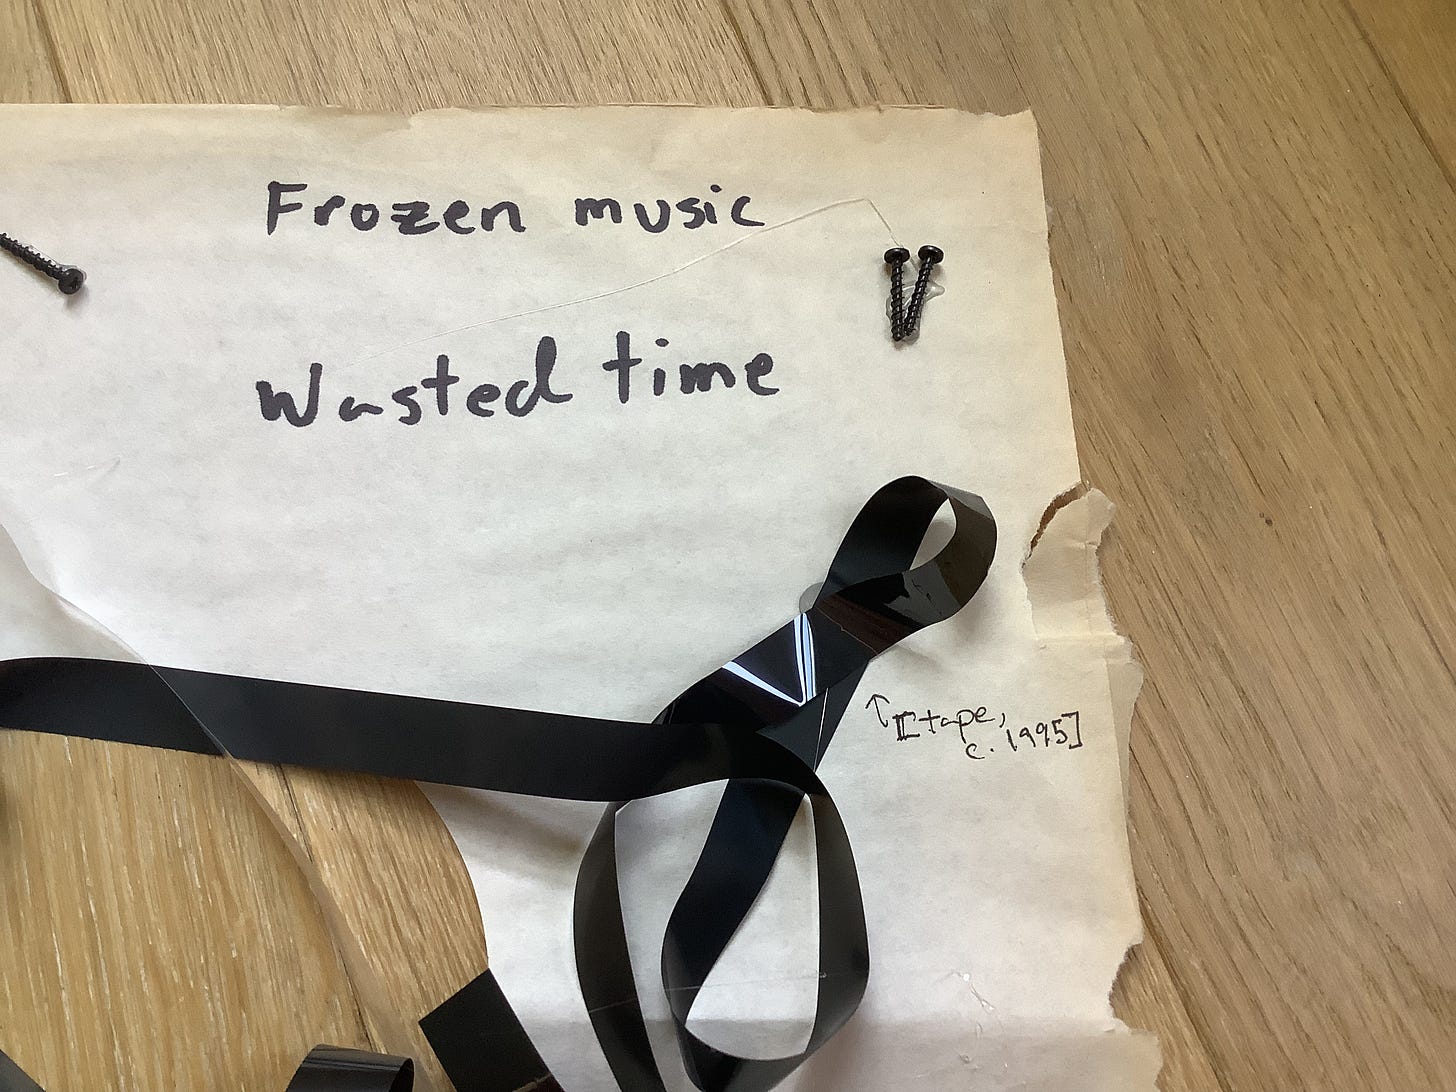 Detail with magnetic tape, screws, and the text “Frozen music / wasted time” plus an arrow marking “[tape, c. 1995]”